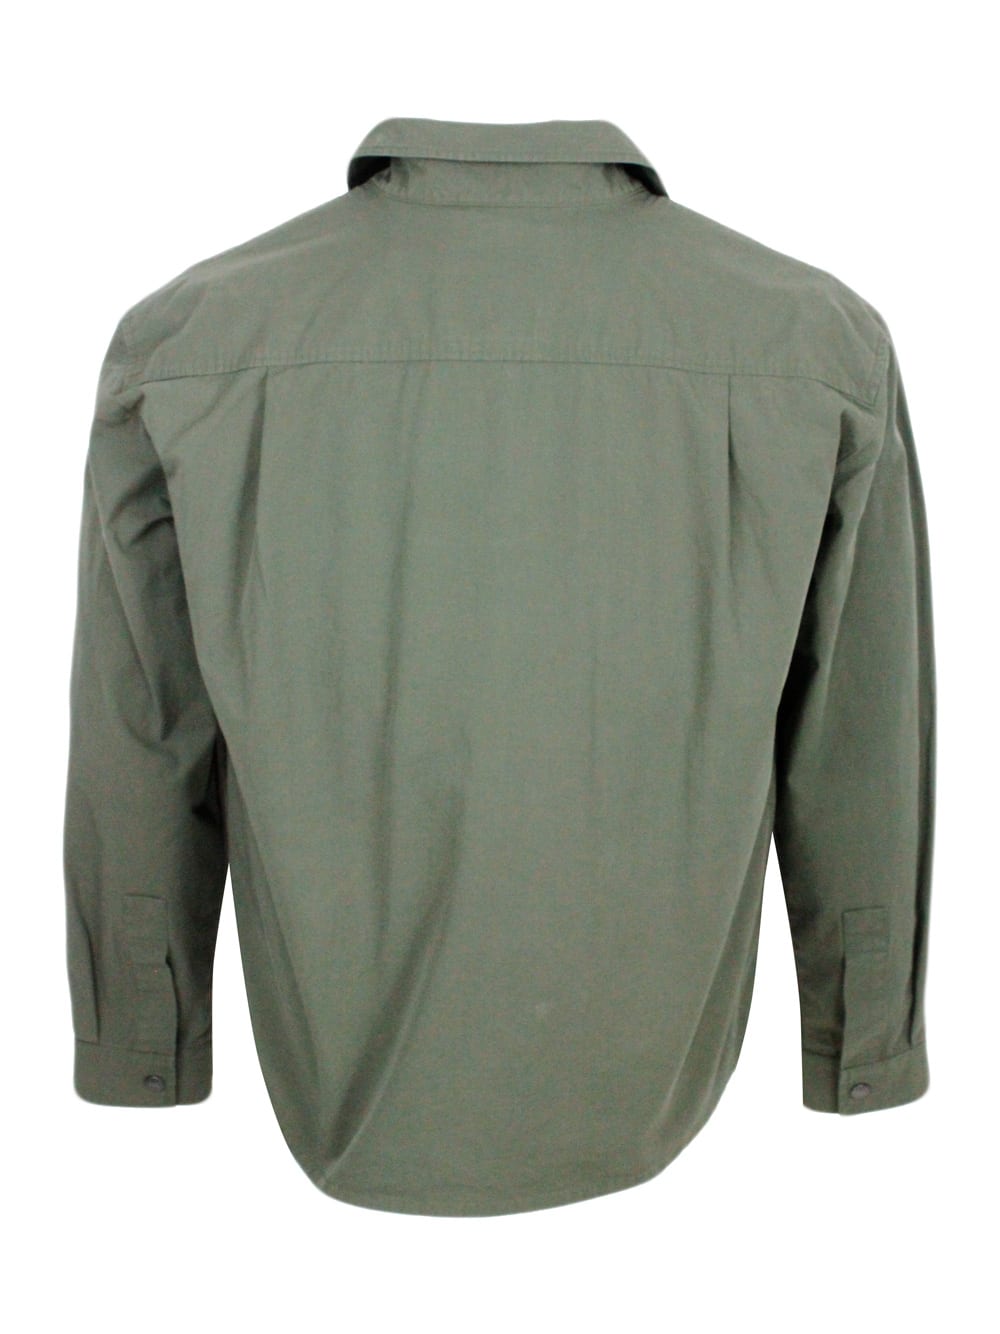 Shop Add Recycled Nylon Shirt Jacket With Detachable Internal Ped Vest. In Green